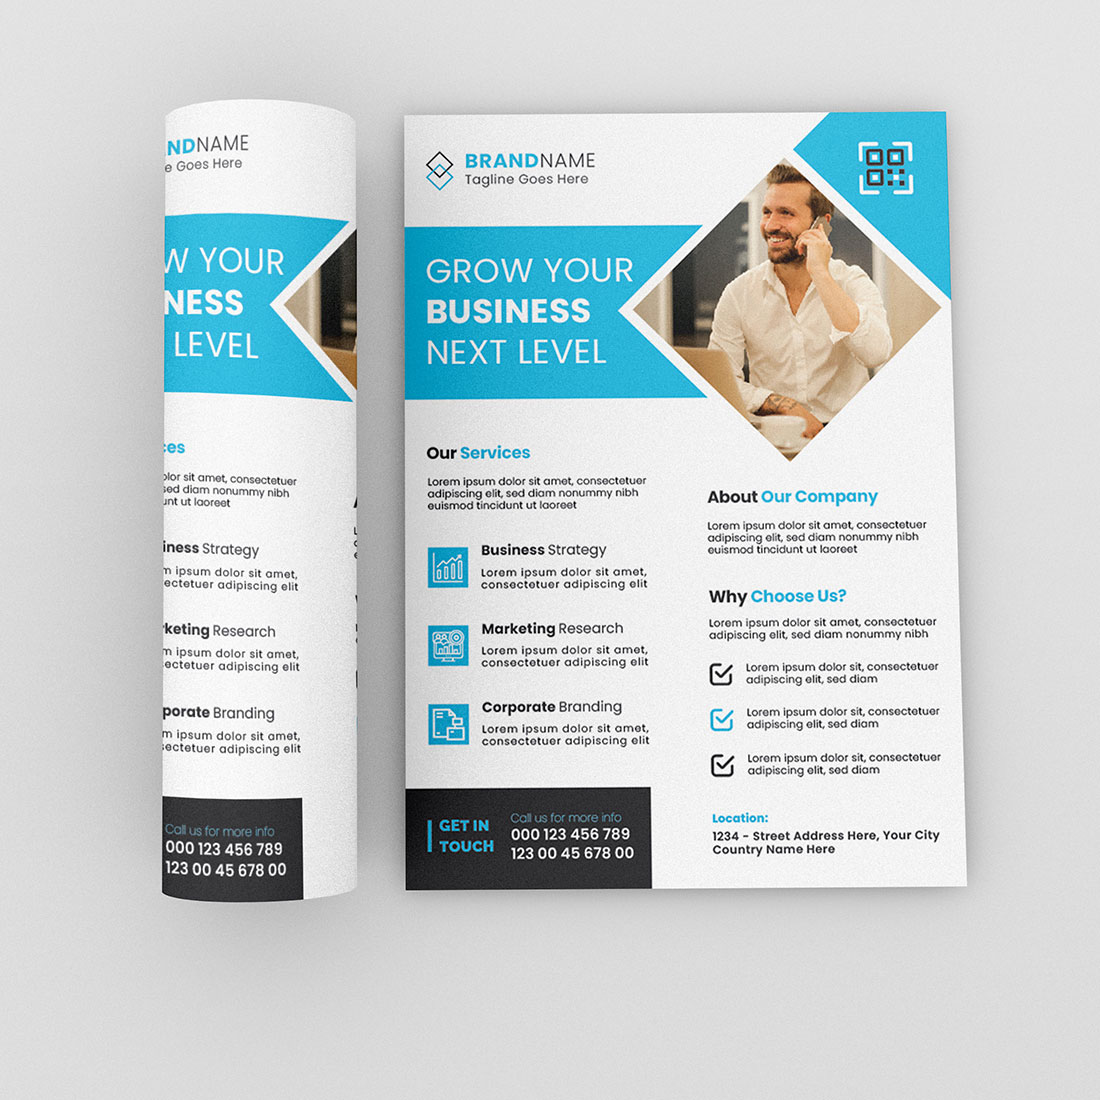 Image of irresistible business flyer template in blue